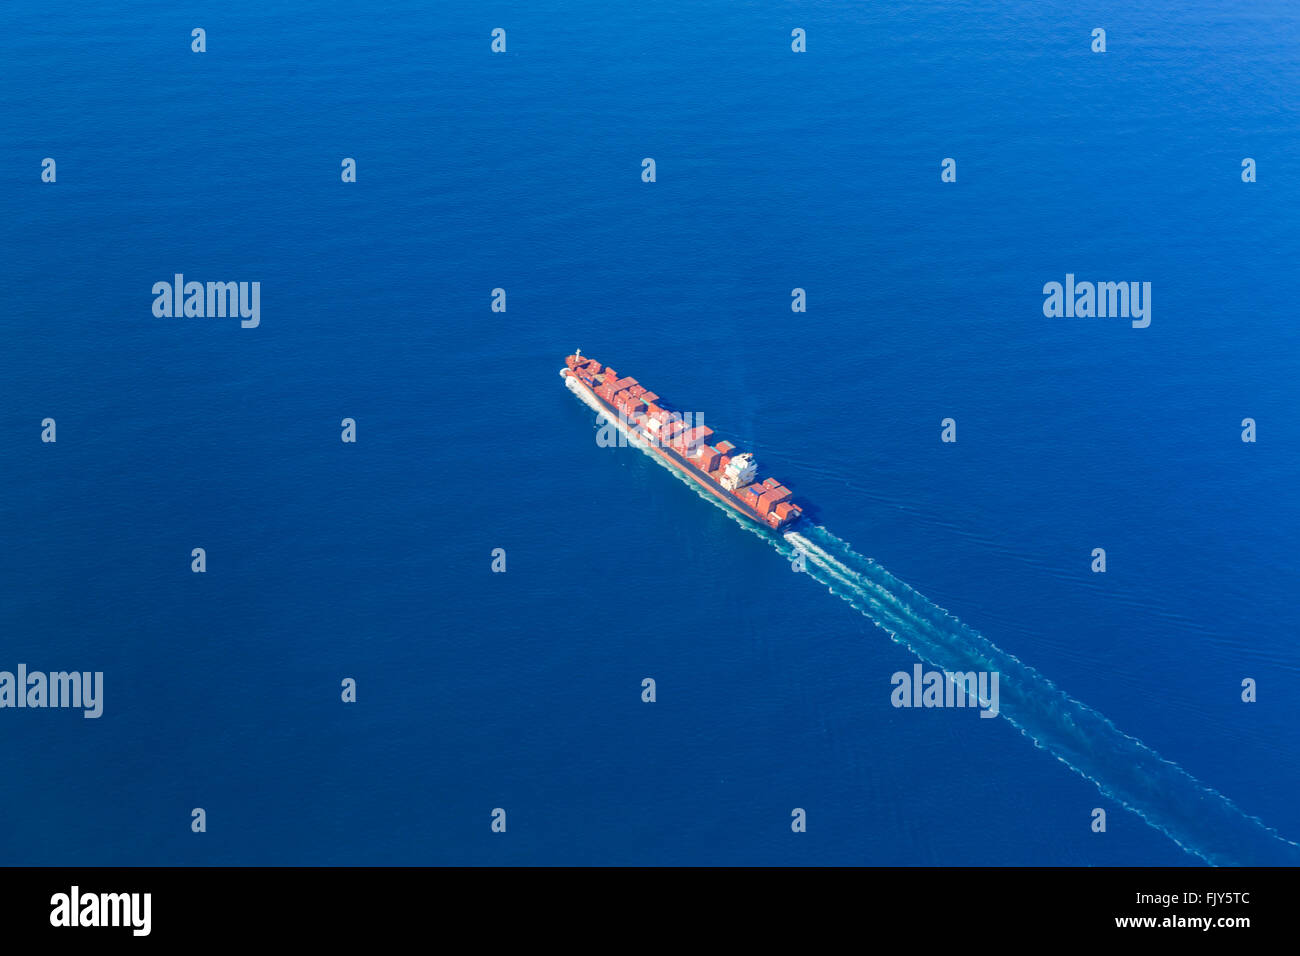 Aerial view of ship carrying freight to the port of New York in a bright blue ocean Stock Photo